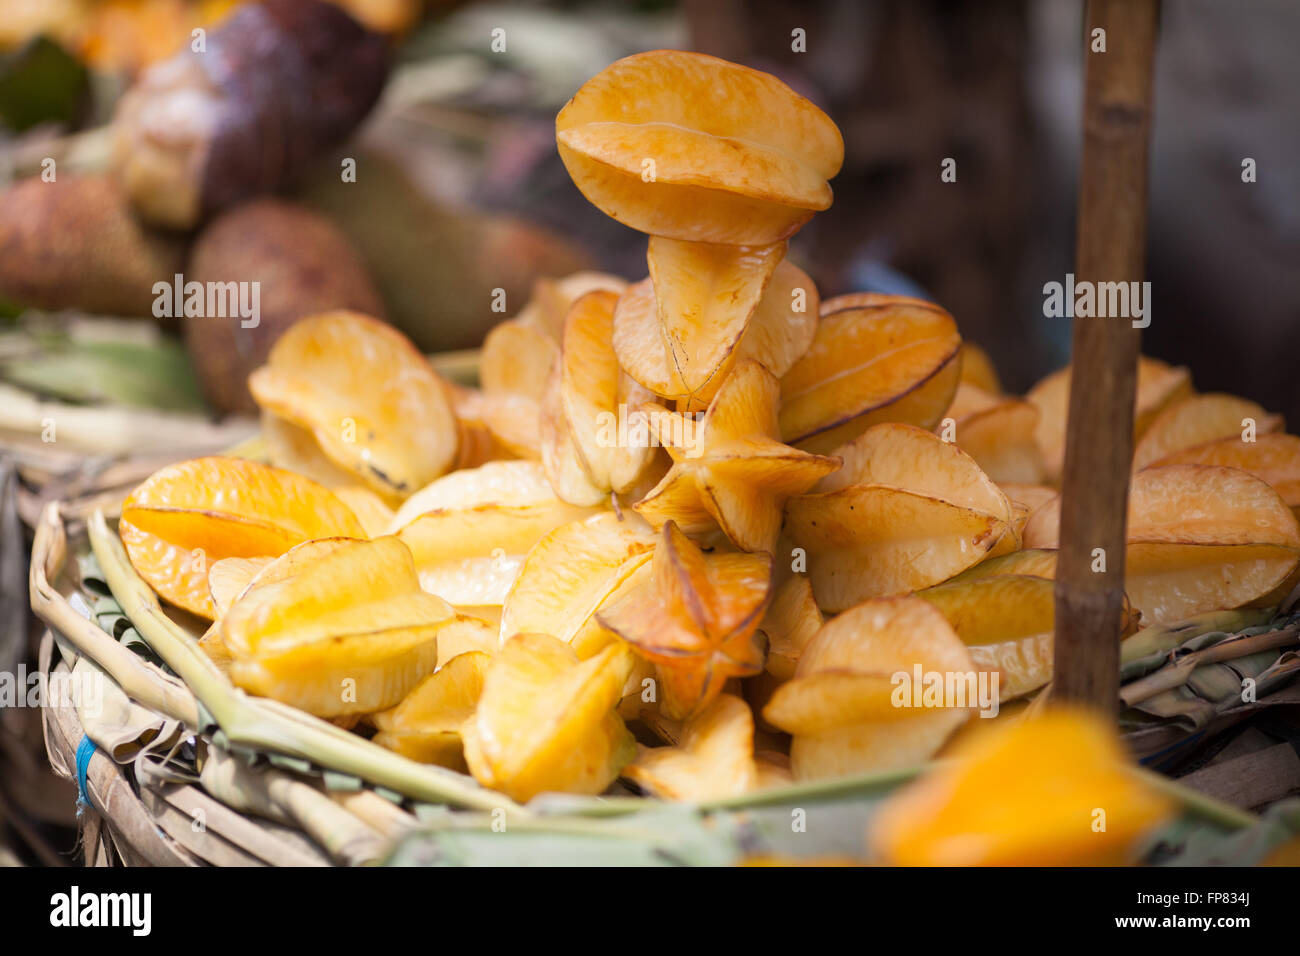 Close-Up Of Starfruits For Sale In Market Stock Photo